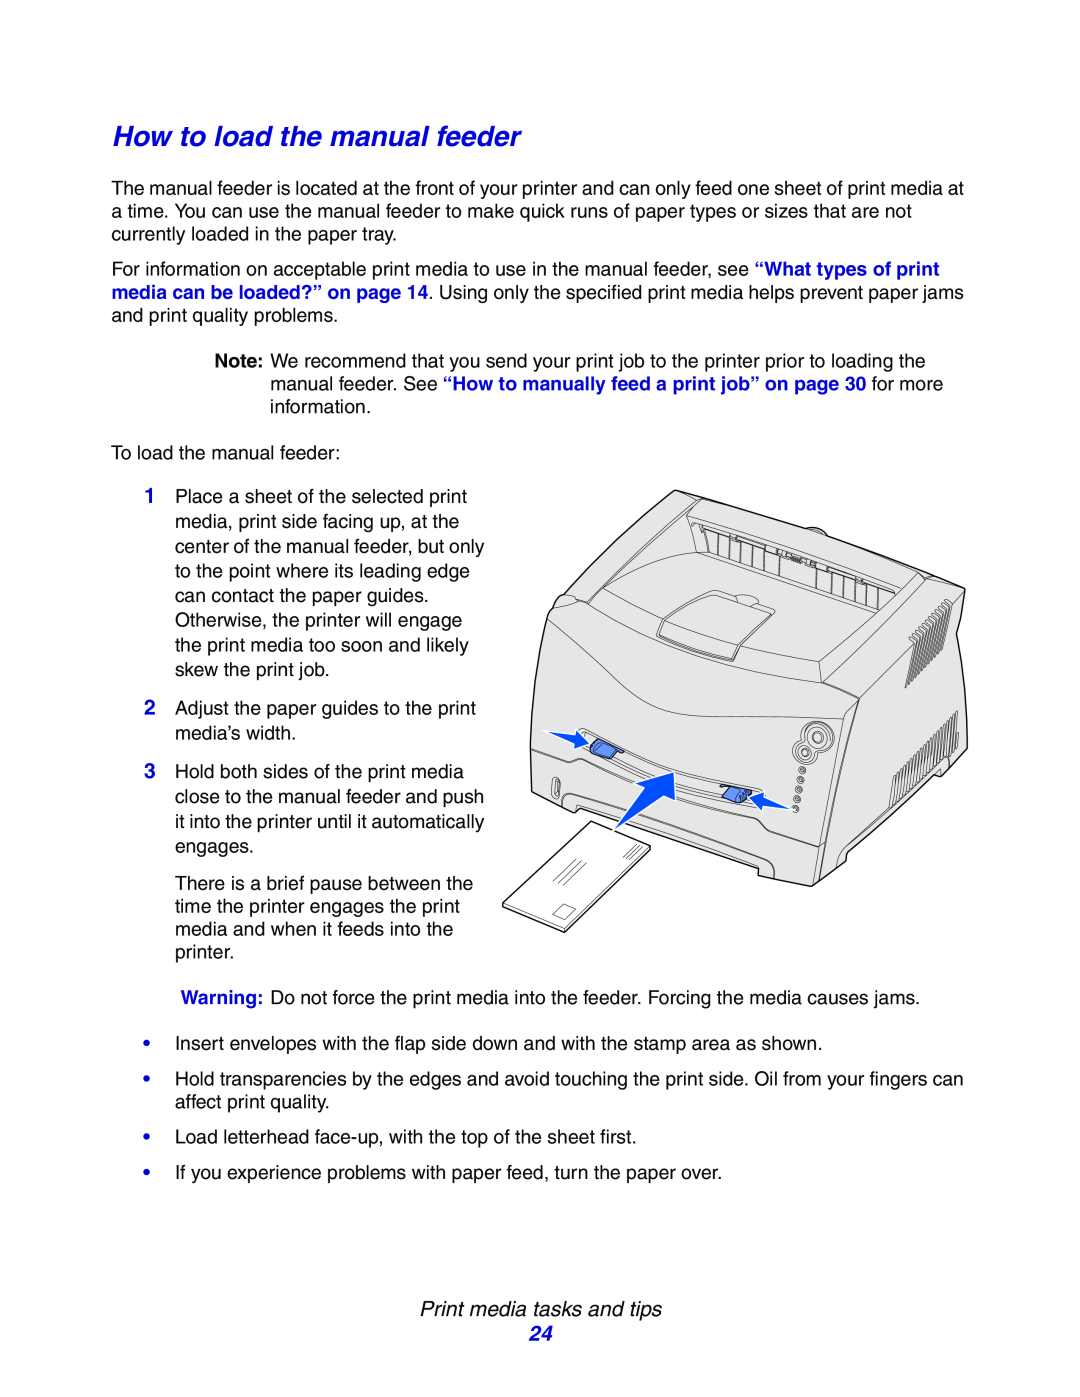 Lexmark E234N How to load the manual feeder, Print media tasks and tips 